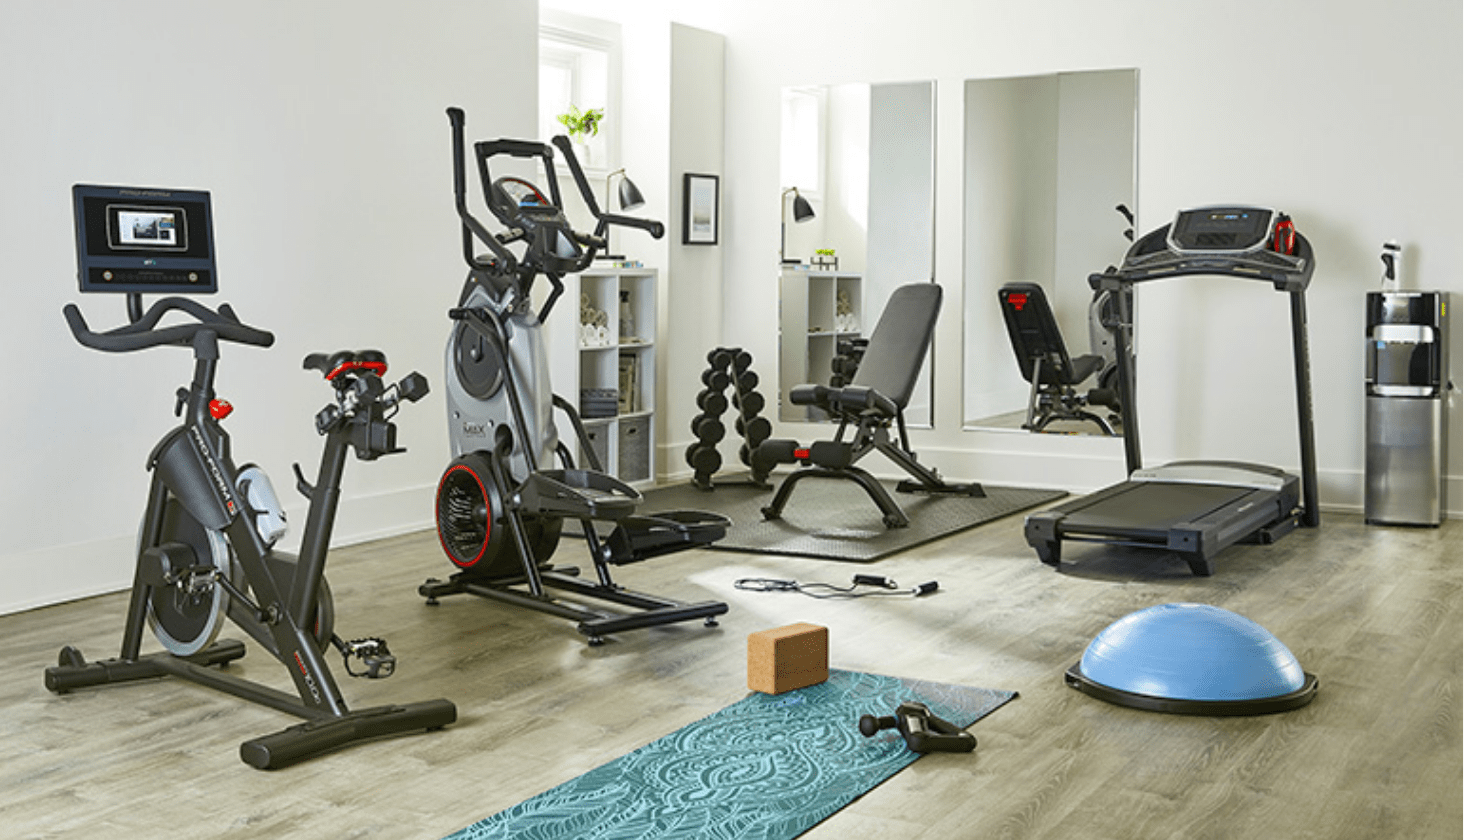 Elliptical, weight bench, exercise bike, weights in a large corner space.